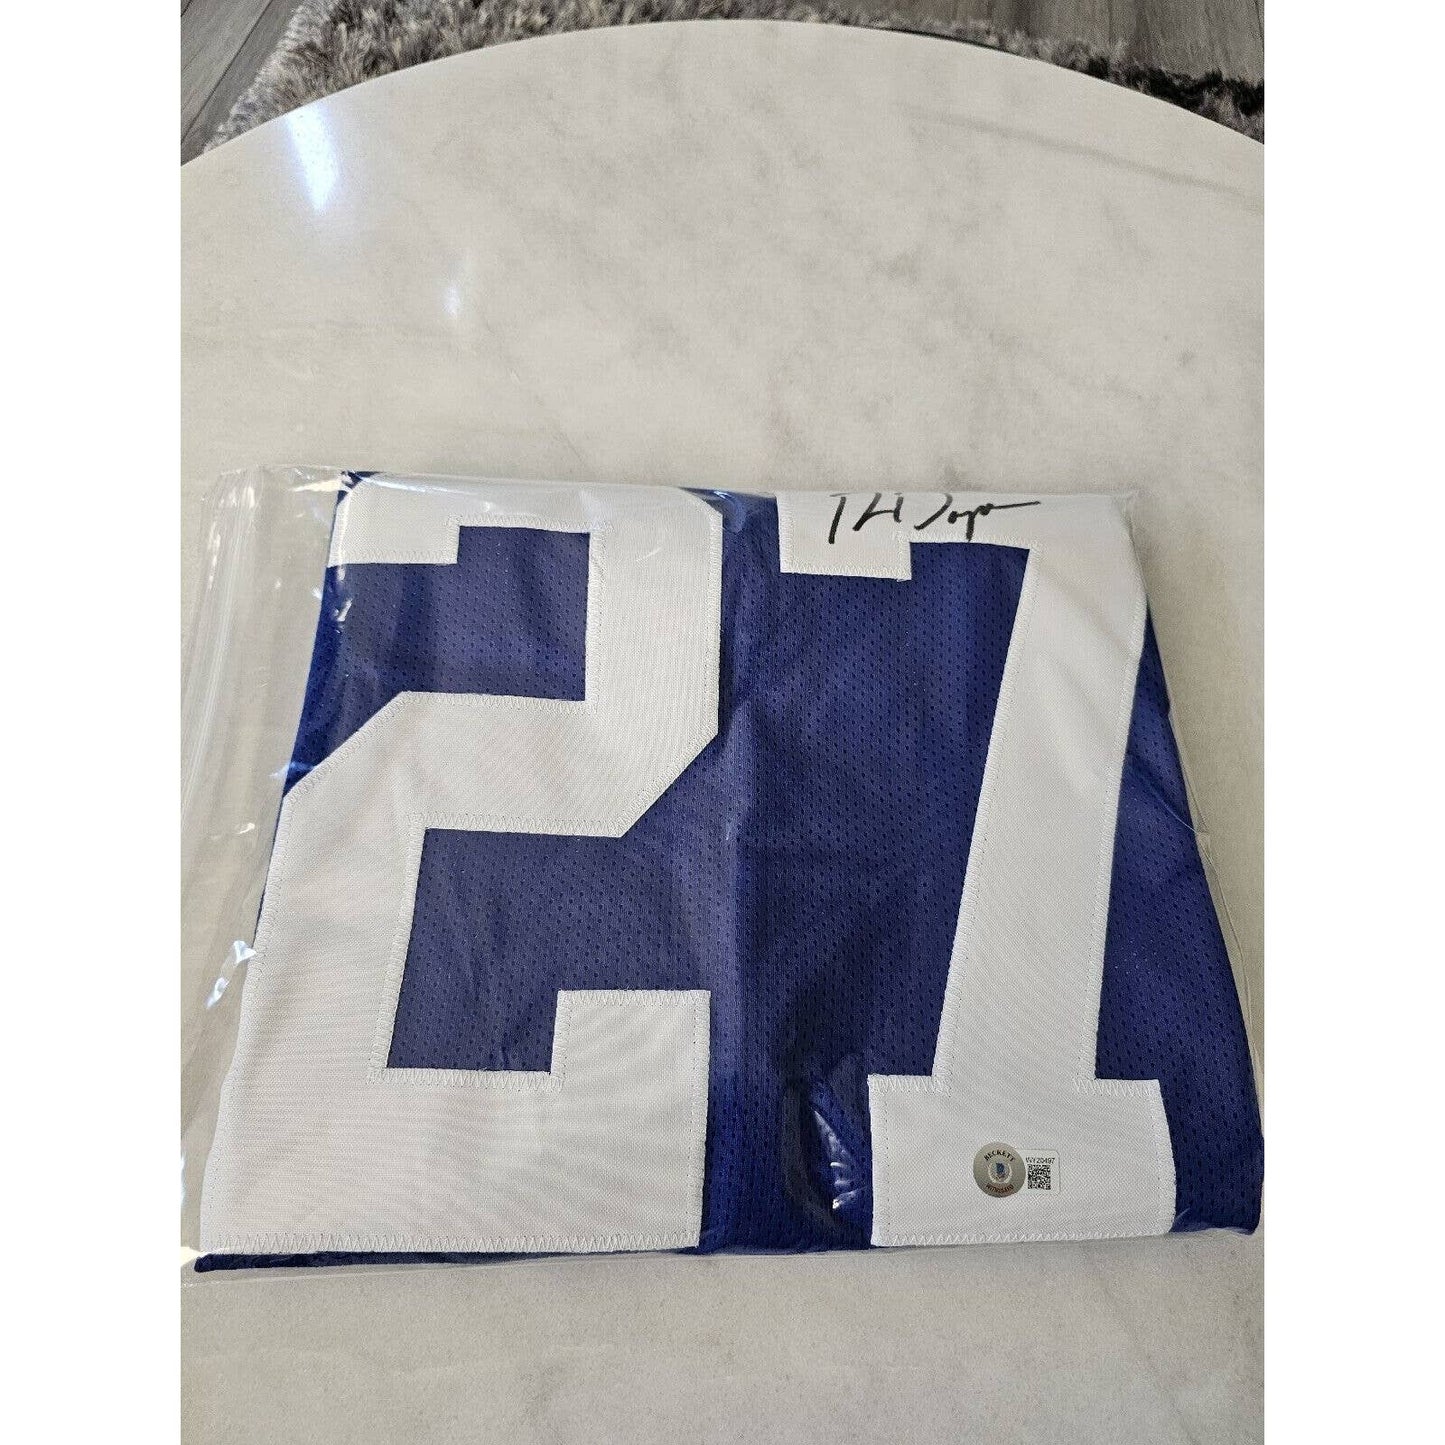 Ron Dayne Autographed/Signed Jersey Beckett COA New York Giants